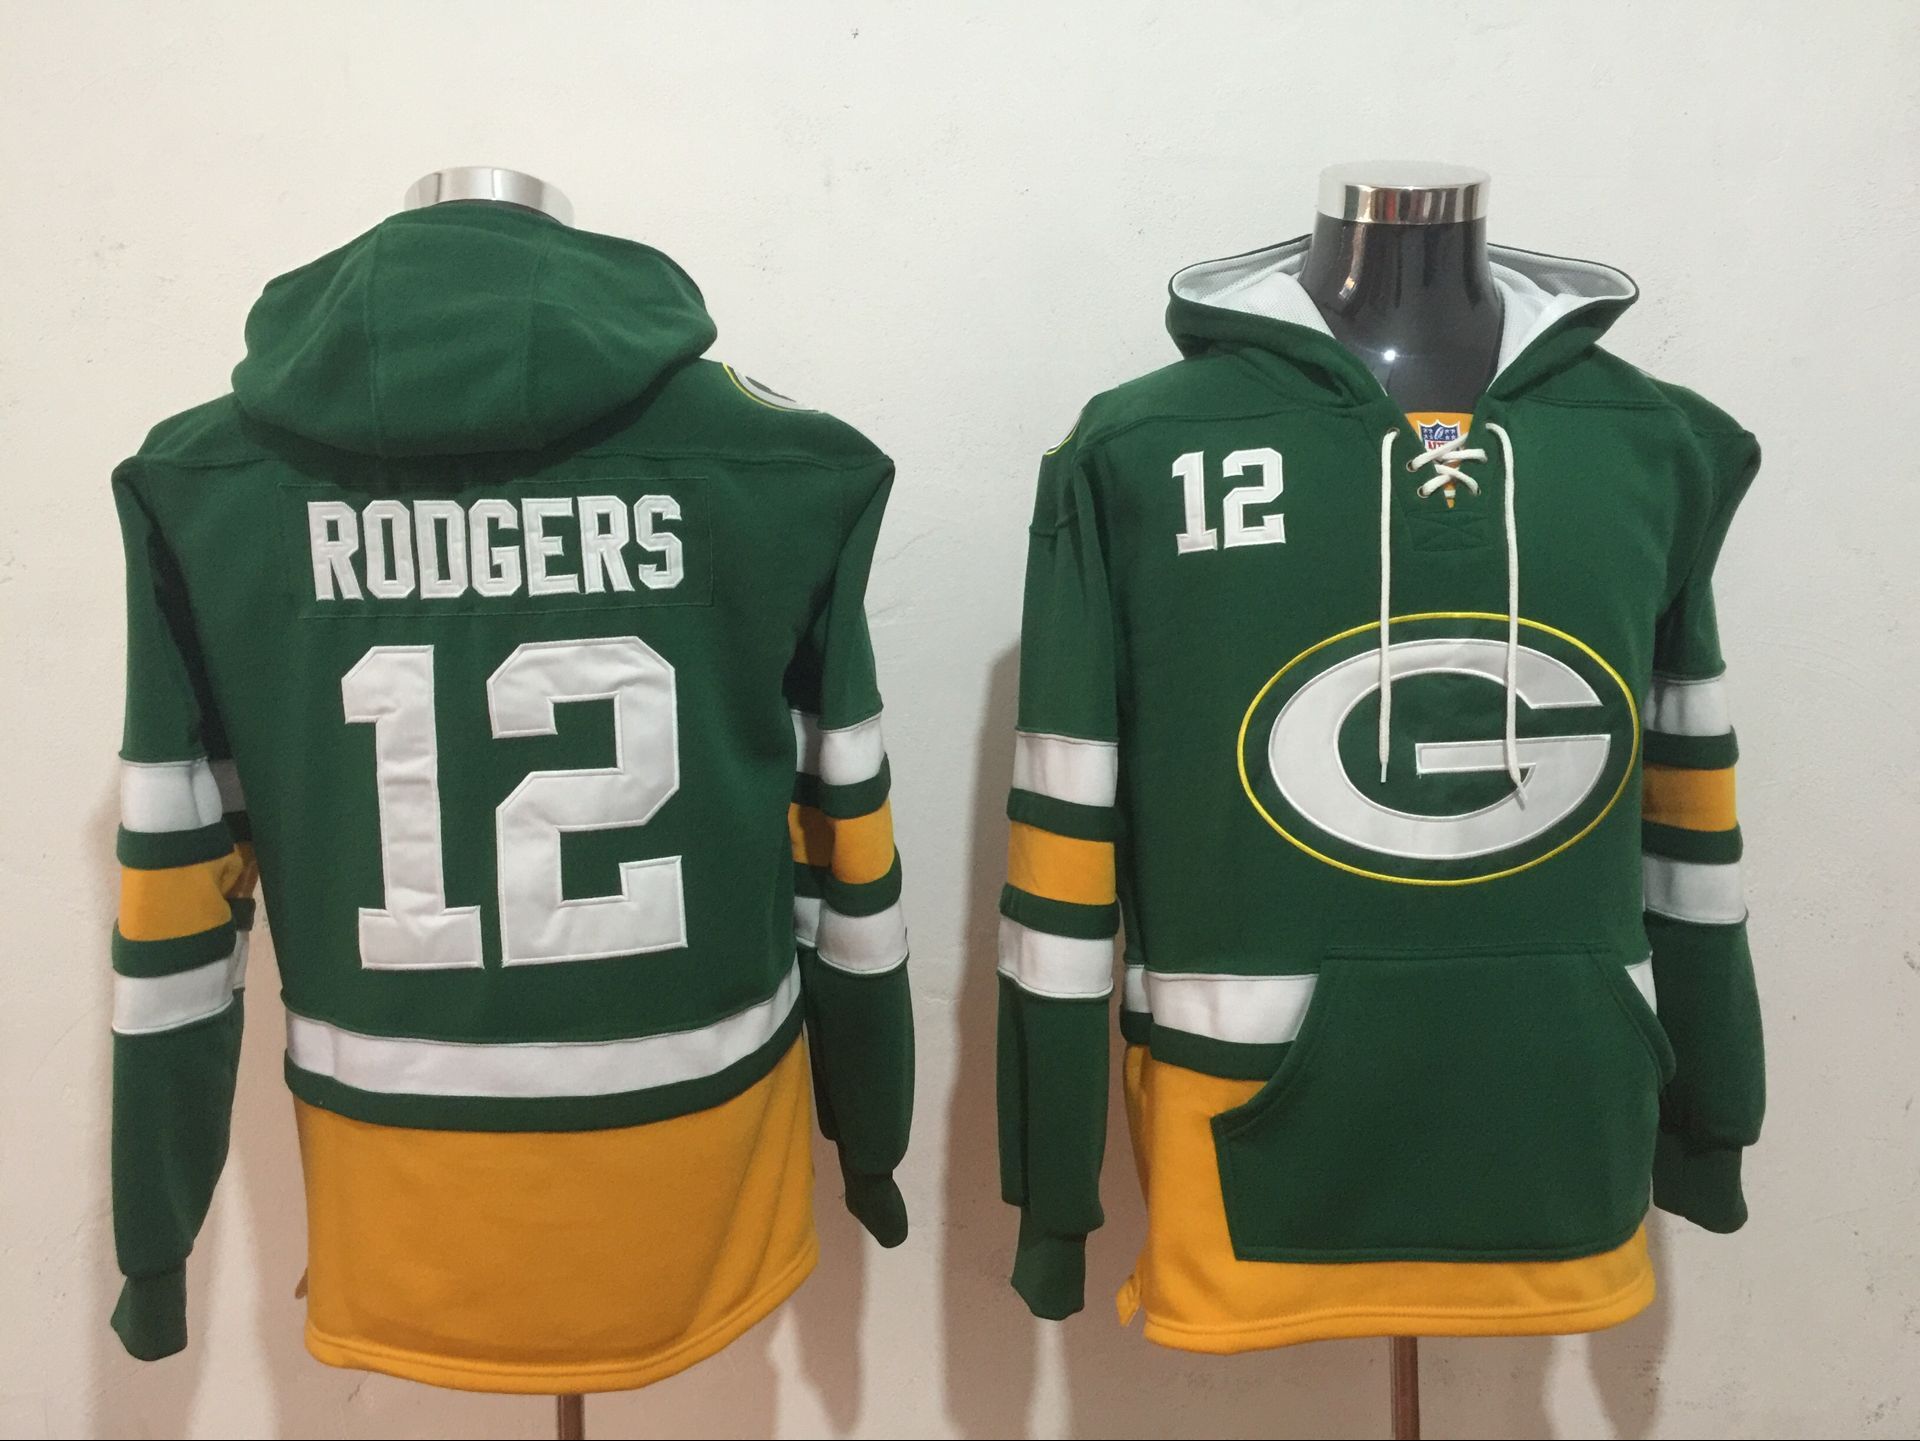 Men's Green Bay Packers #12 Aaron Rodgers Green All Stitched NFL Hoodie Sweatshirt